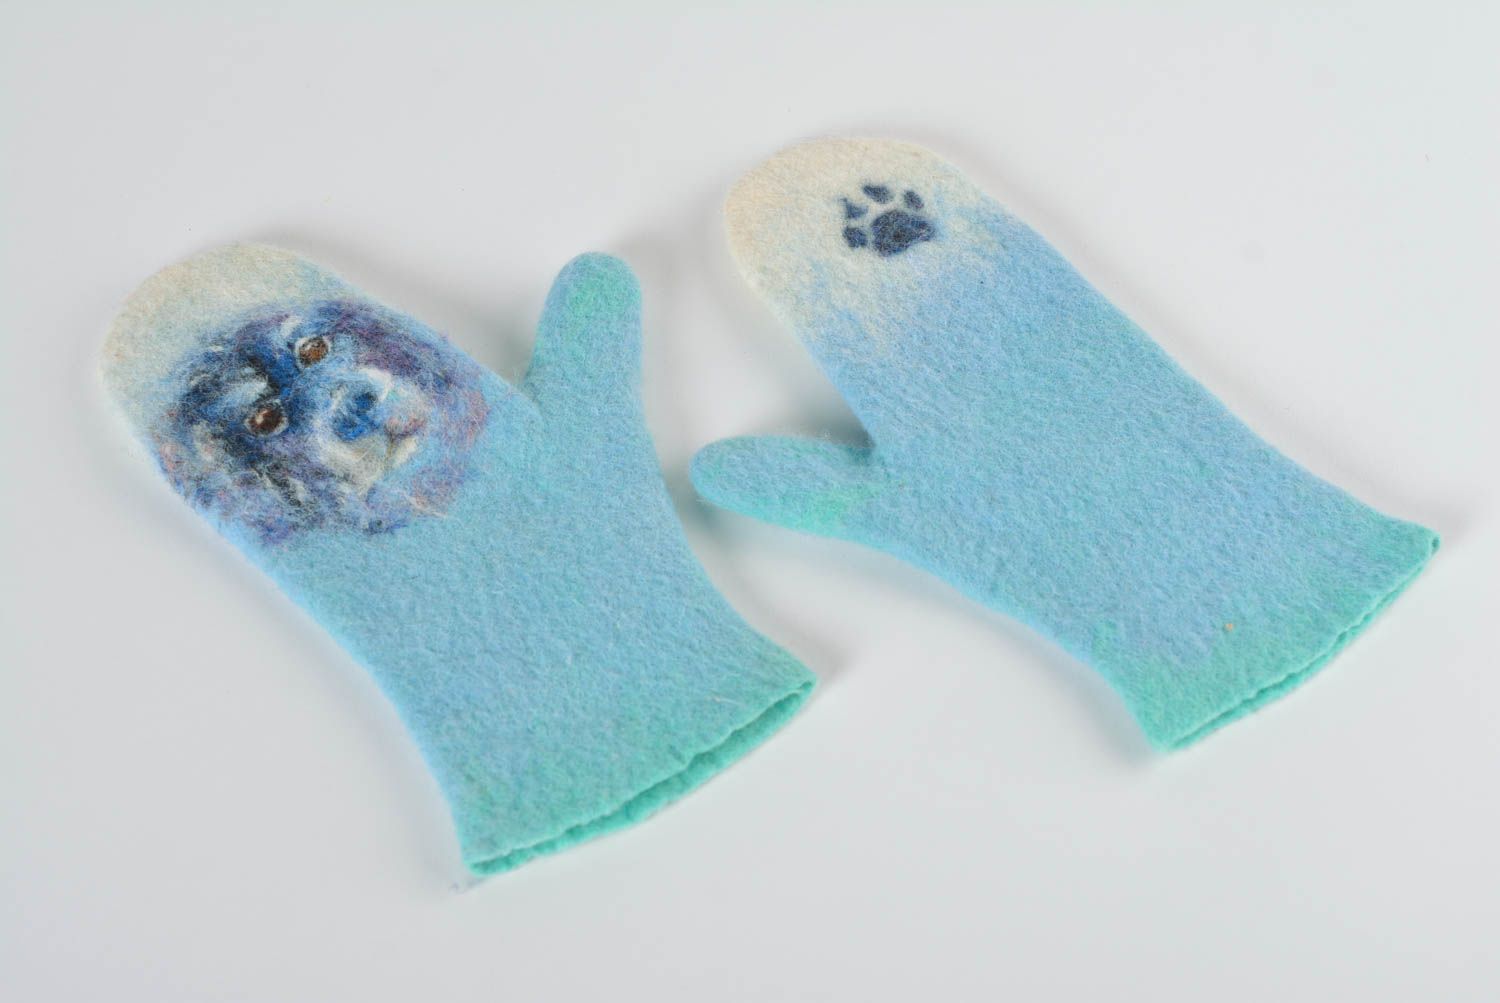 Handmade felted mittens wool knit mittens warm mittens mittens with a dog image photo 2